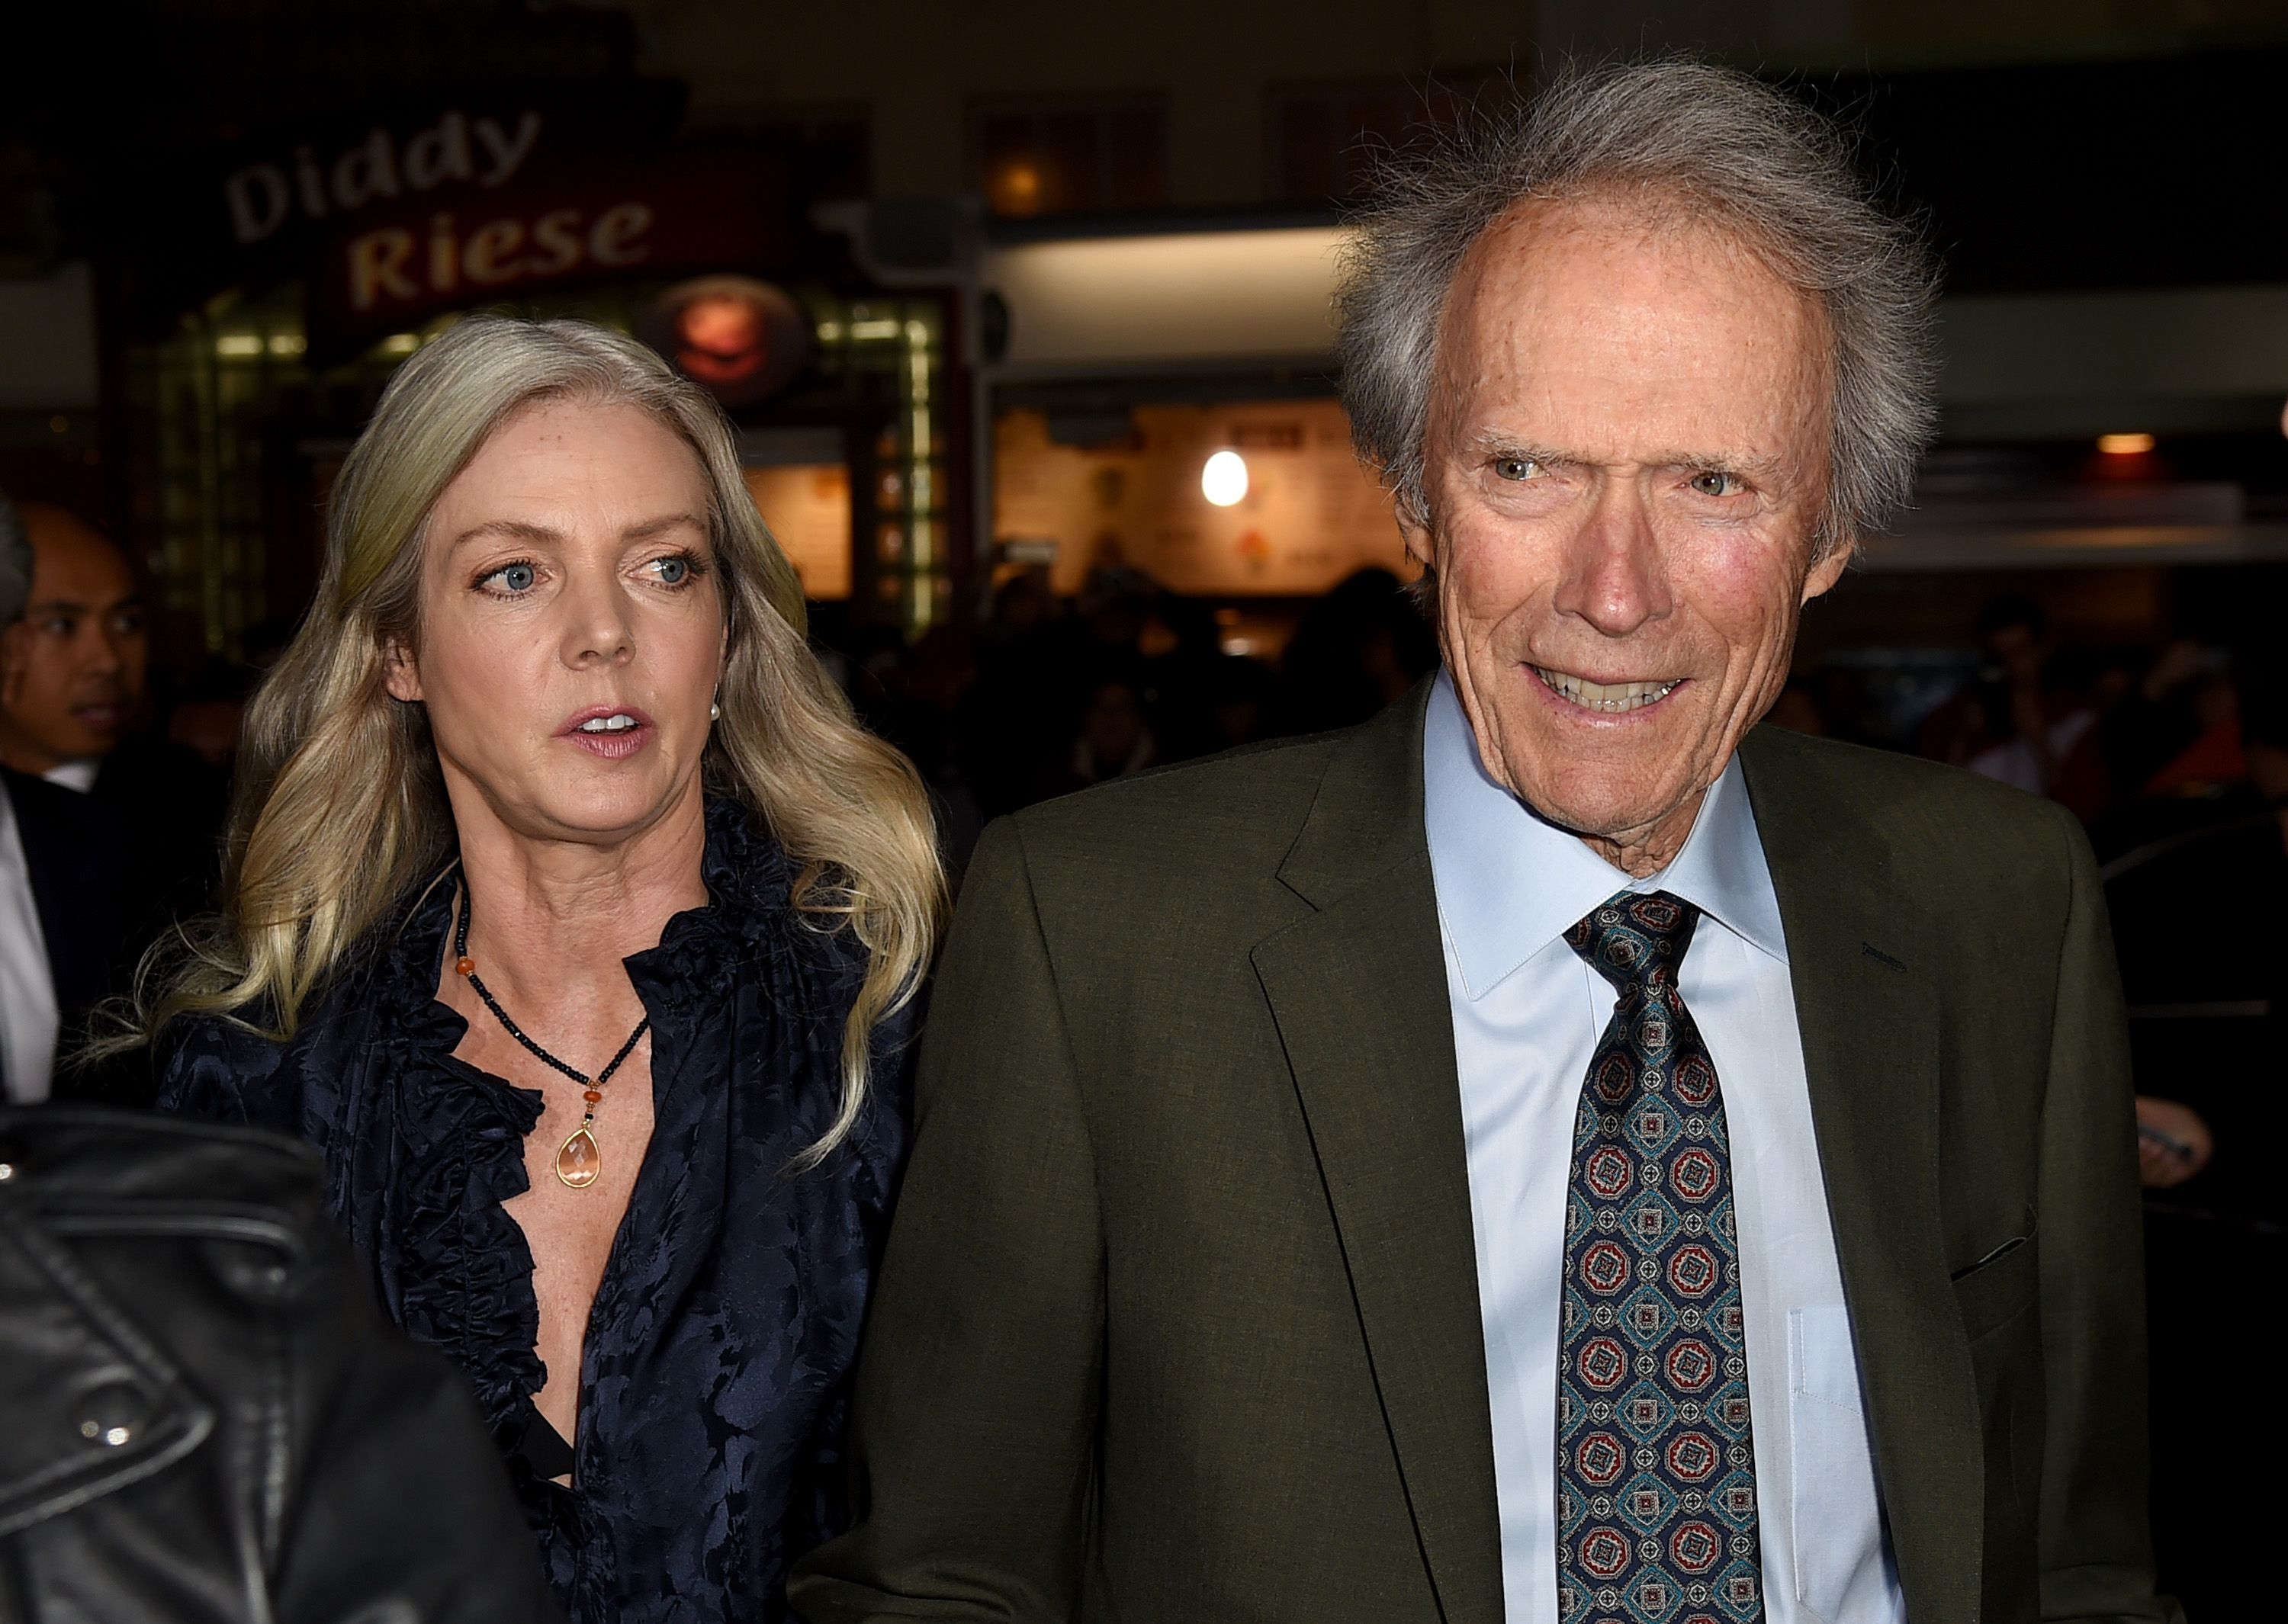 Christina Sandera (L) and Clint Eastwood arrive at the premiere of Warner Bros. Pictures' "The Mule" at the Village Theatre on December 10, 2018 in Los Angeles, California. | Source: Getty Images